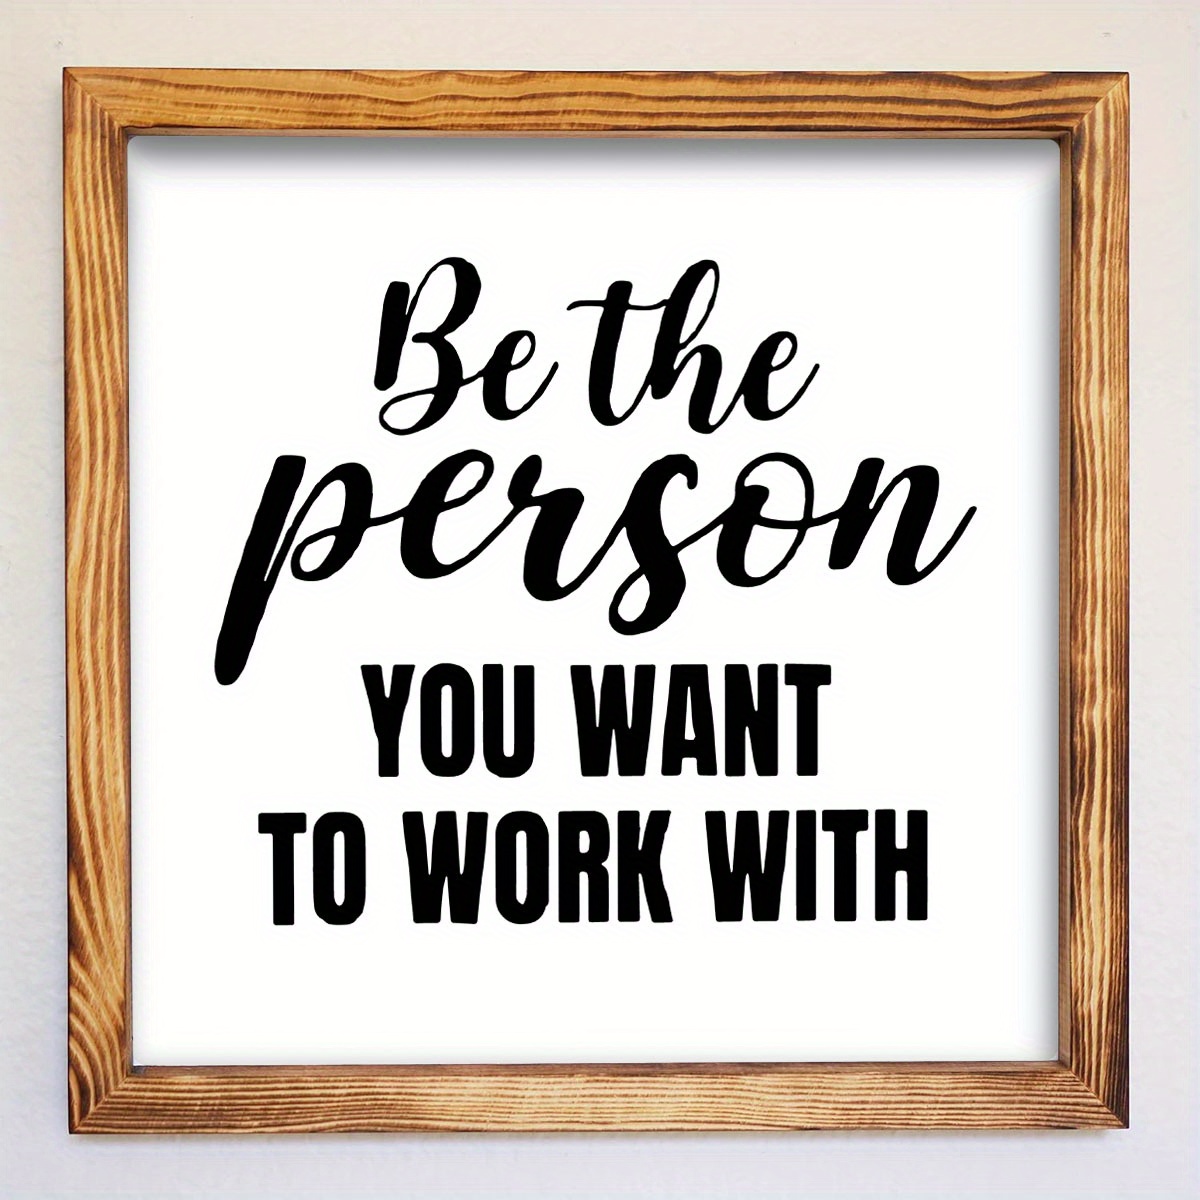 

1pc, Rustic Wooden Frame Wall Art, "be The Person You Want To Work With", Inspirational Quote Print, Classic Black & White Home Decor, Minimalist Positive Artwork For Office & Living Spaces